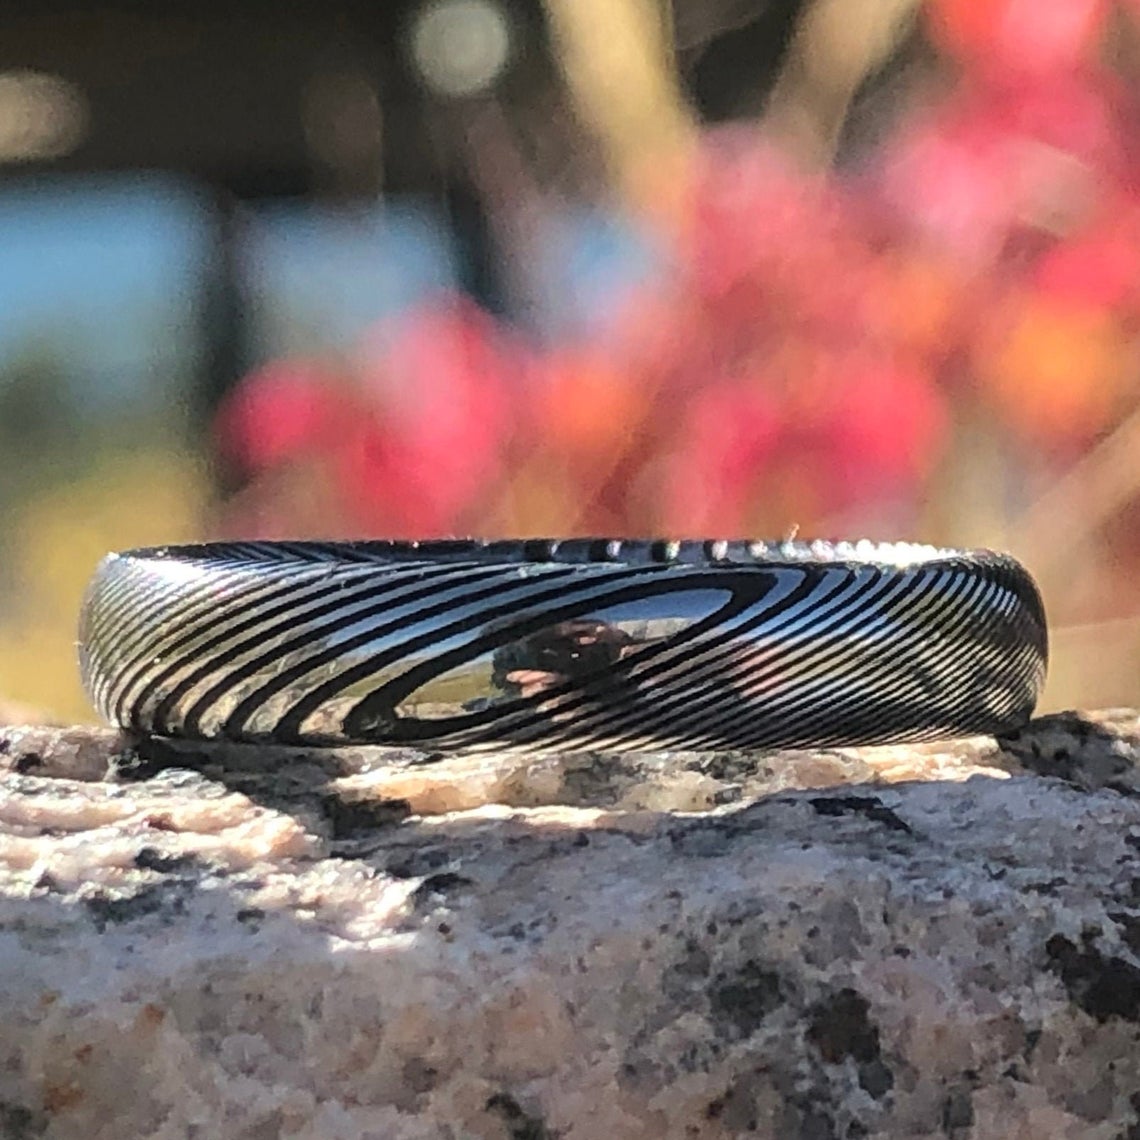 4mm wide Damascus steel wedding band with a rounded profile